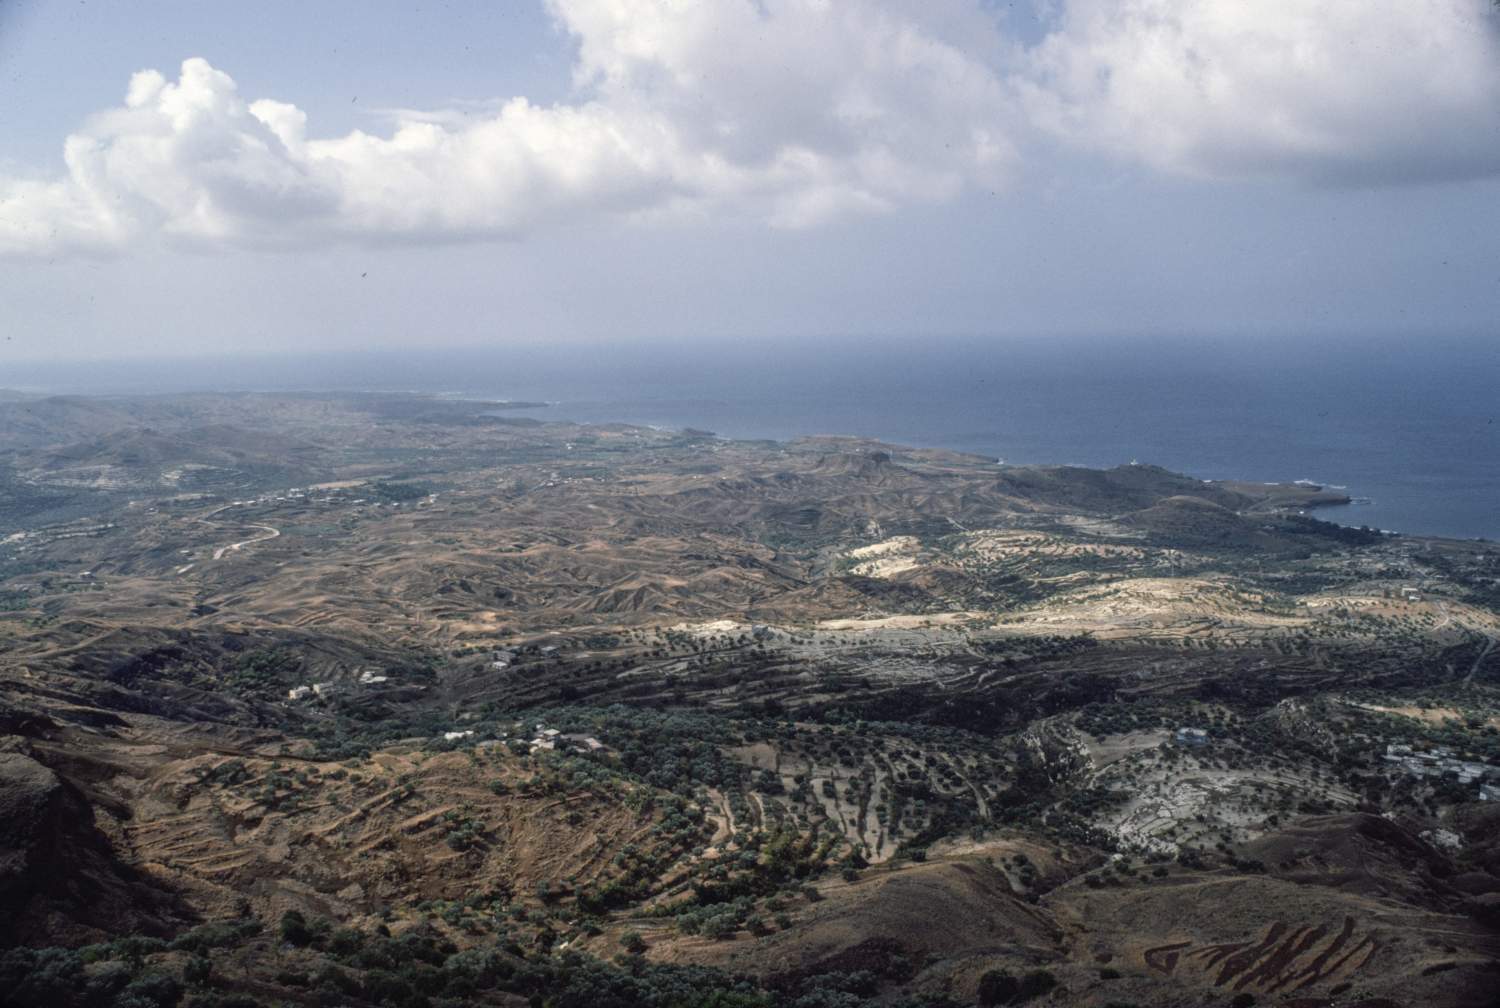 View from fortress southwest toward Syrian coastline.